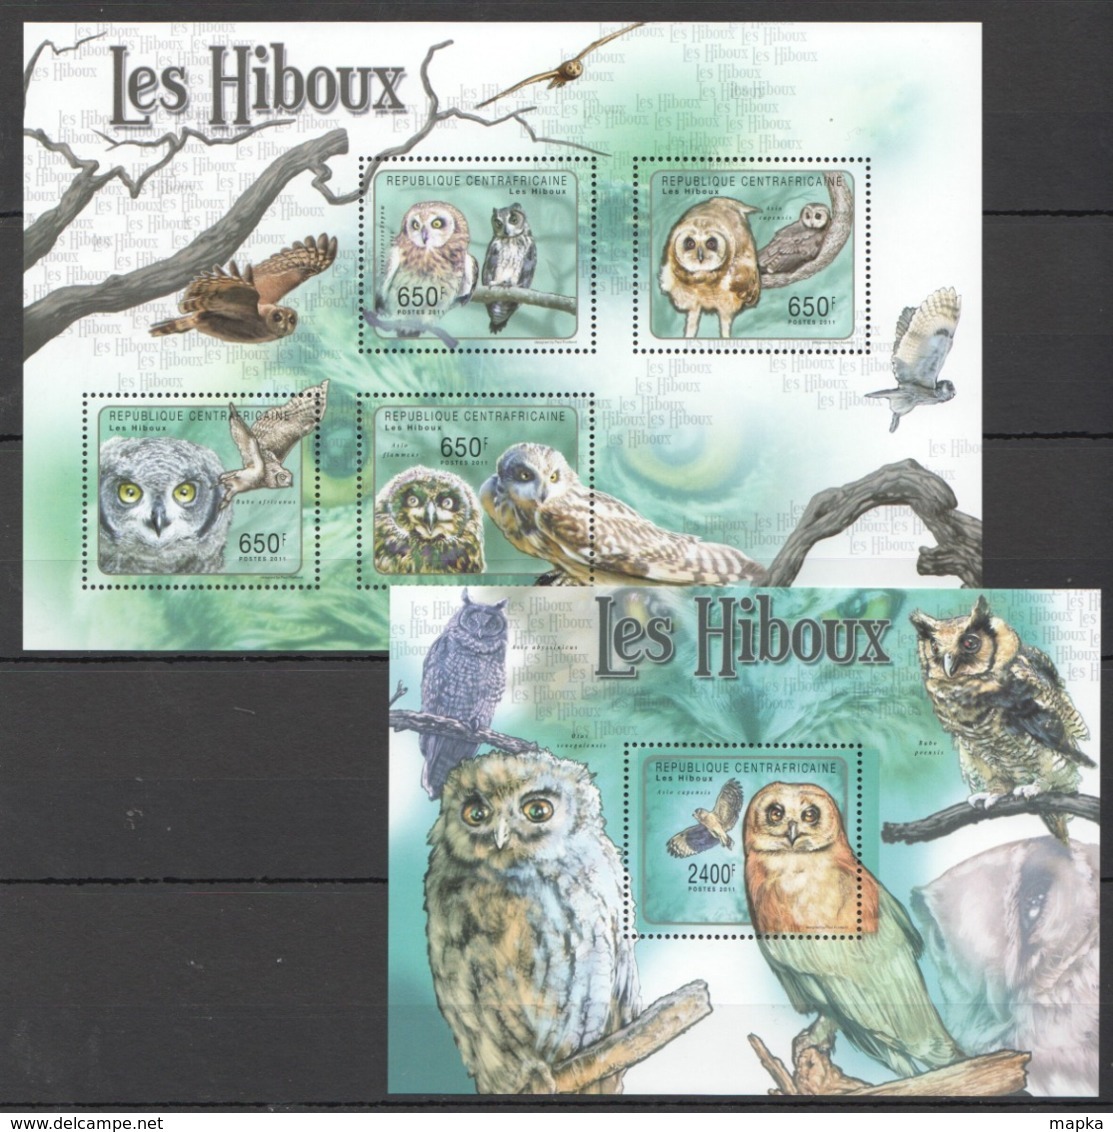 CA1048 2011 CENTRAL AFRICA CENTRAFRICAINE FAUNA OWLS LES HIBOUX 1KB+1BL MNH - Hiboux & Chouettes